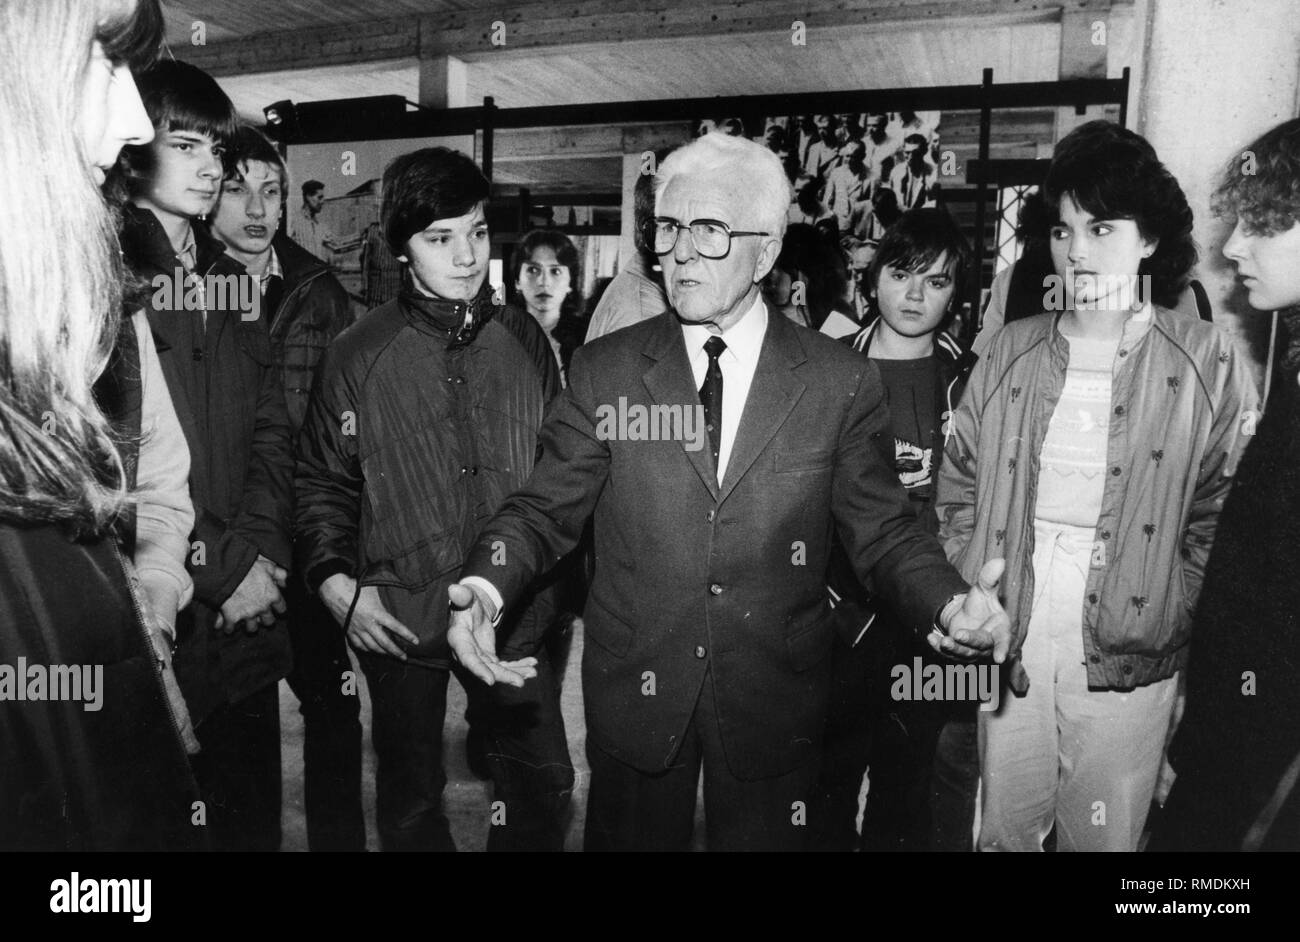 Adolf Meislinger, former concentration camp prisoner, leads young people presumably of the Aktion Suehnezeichen (Action Reconciliation) through the exhibition in the former agricultural building of the Dachau concentration camp, presumably in 1985. Stock Photo